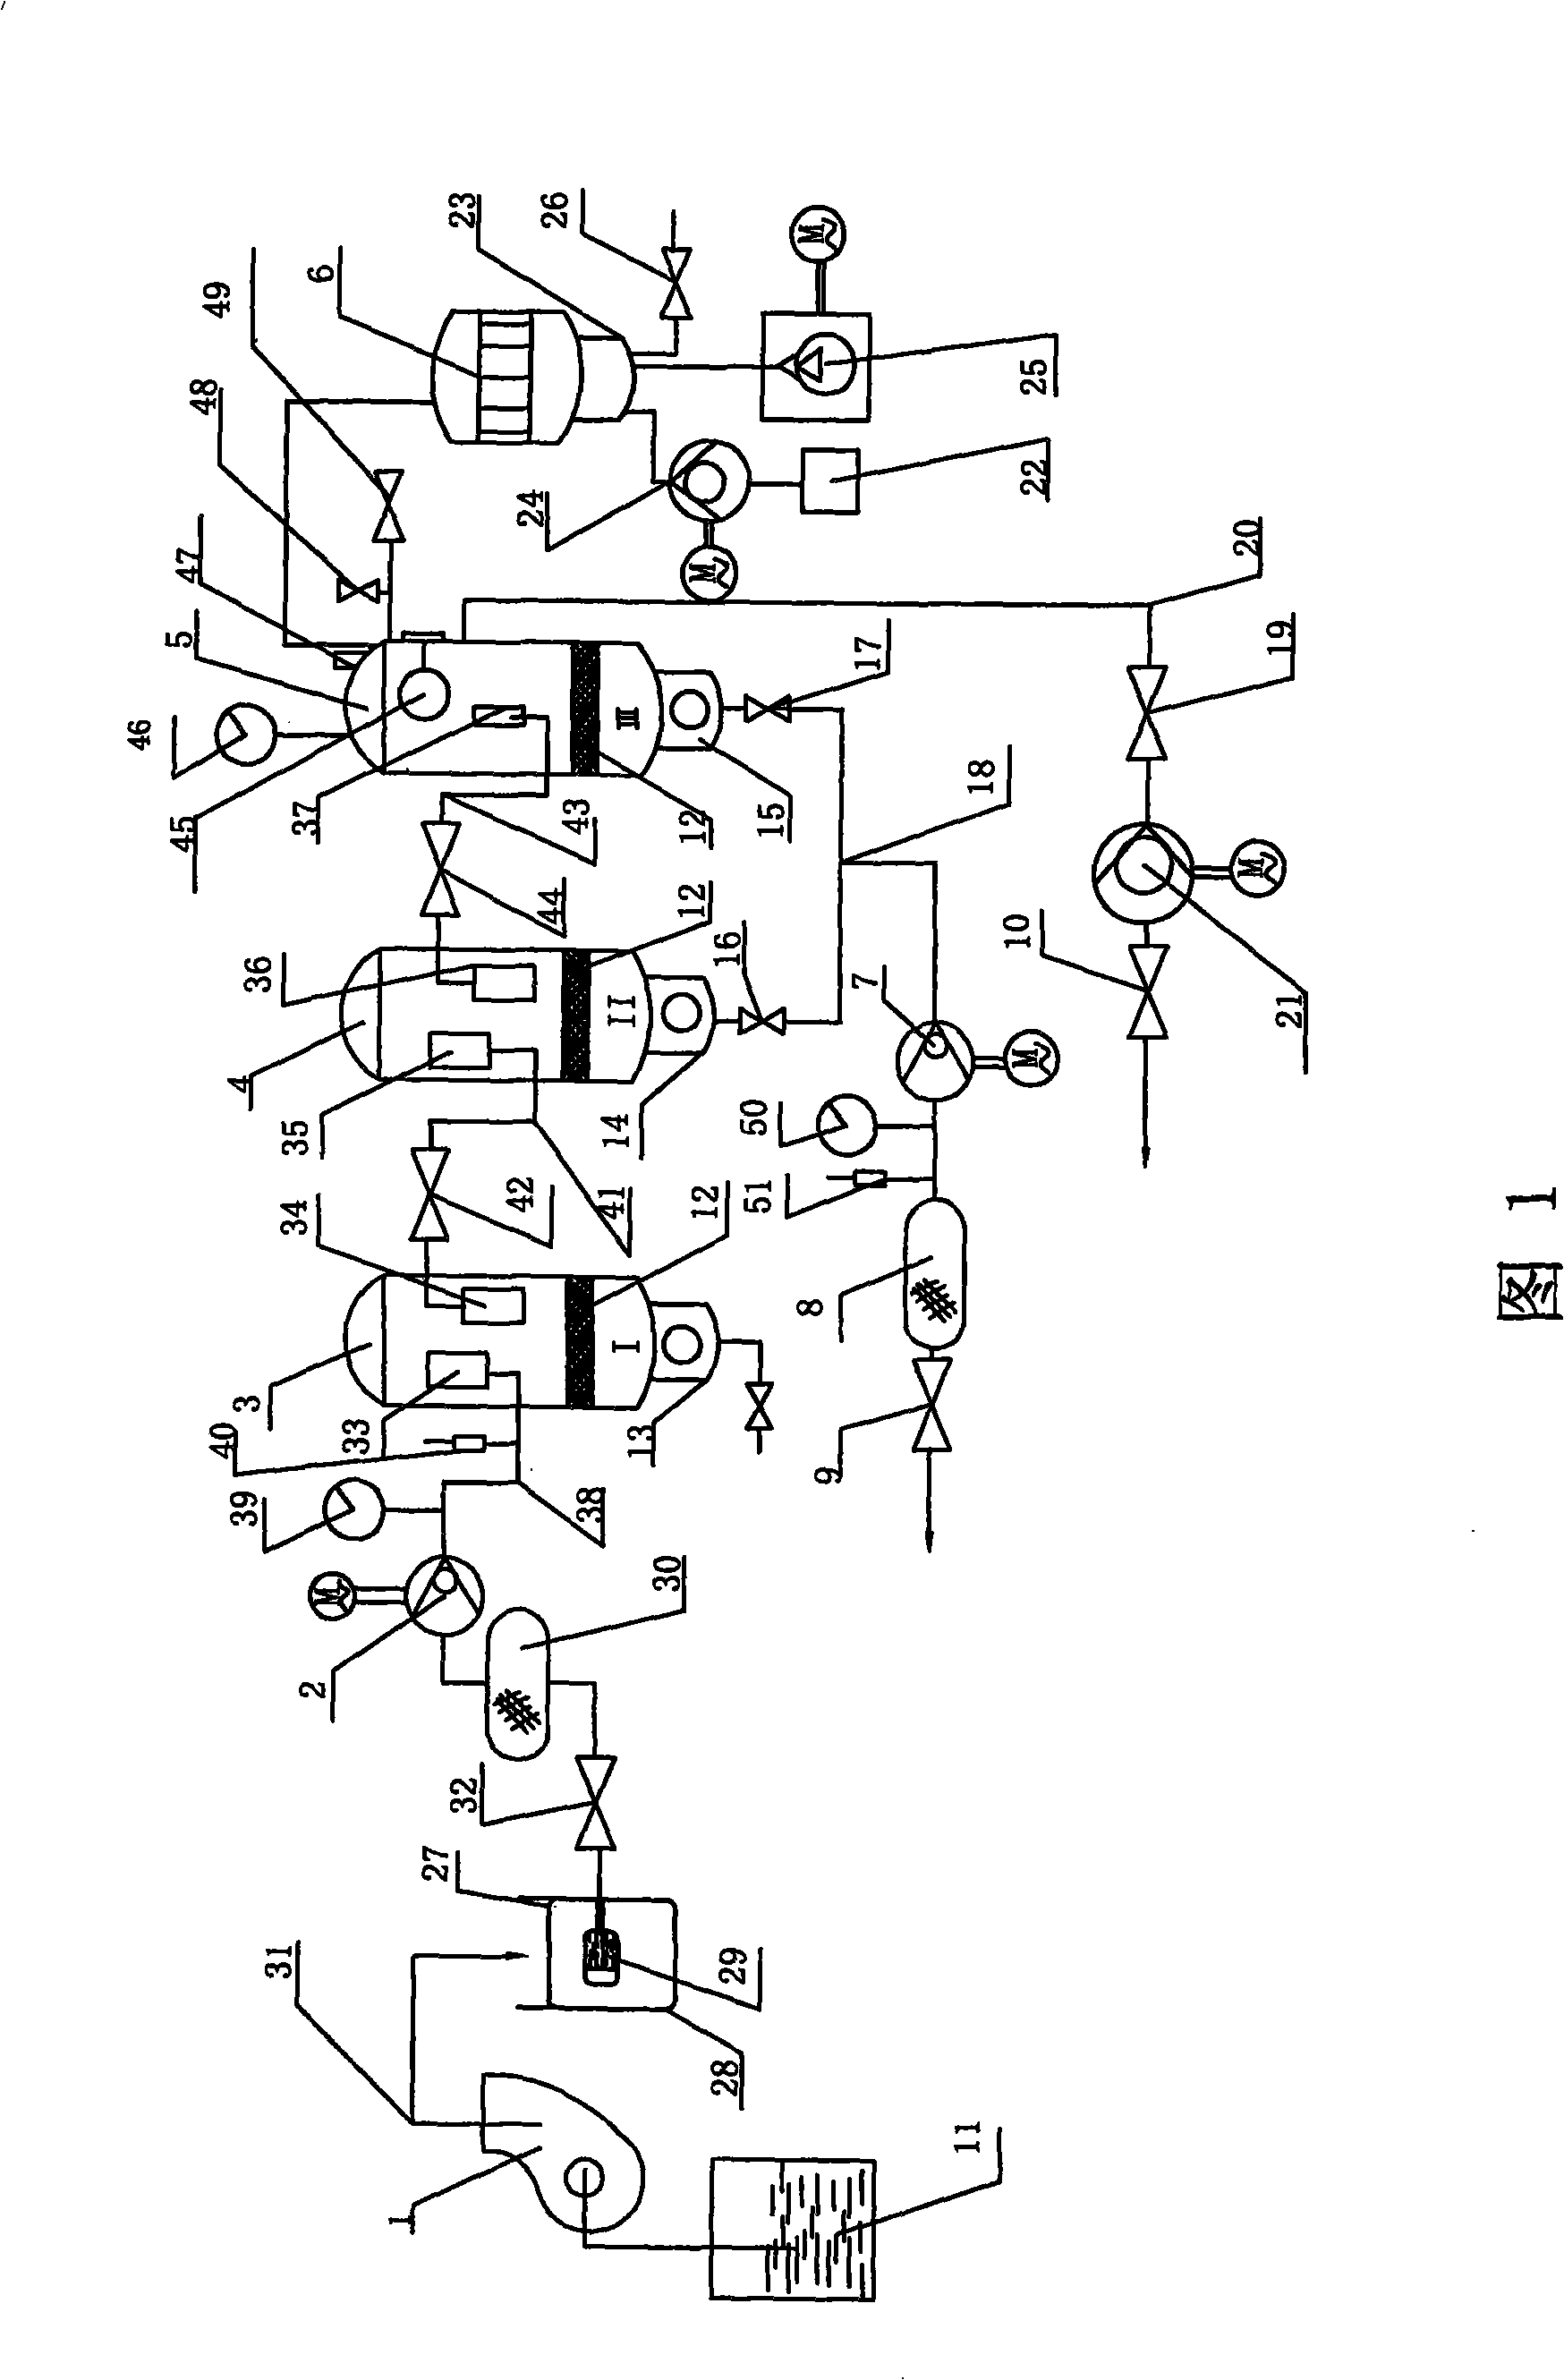 Processing system for large moisture rouging, degreasing, recycling oil and water, and reusing the same